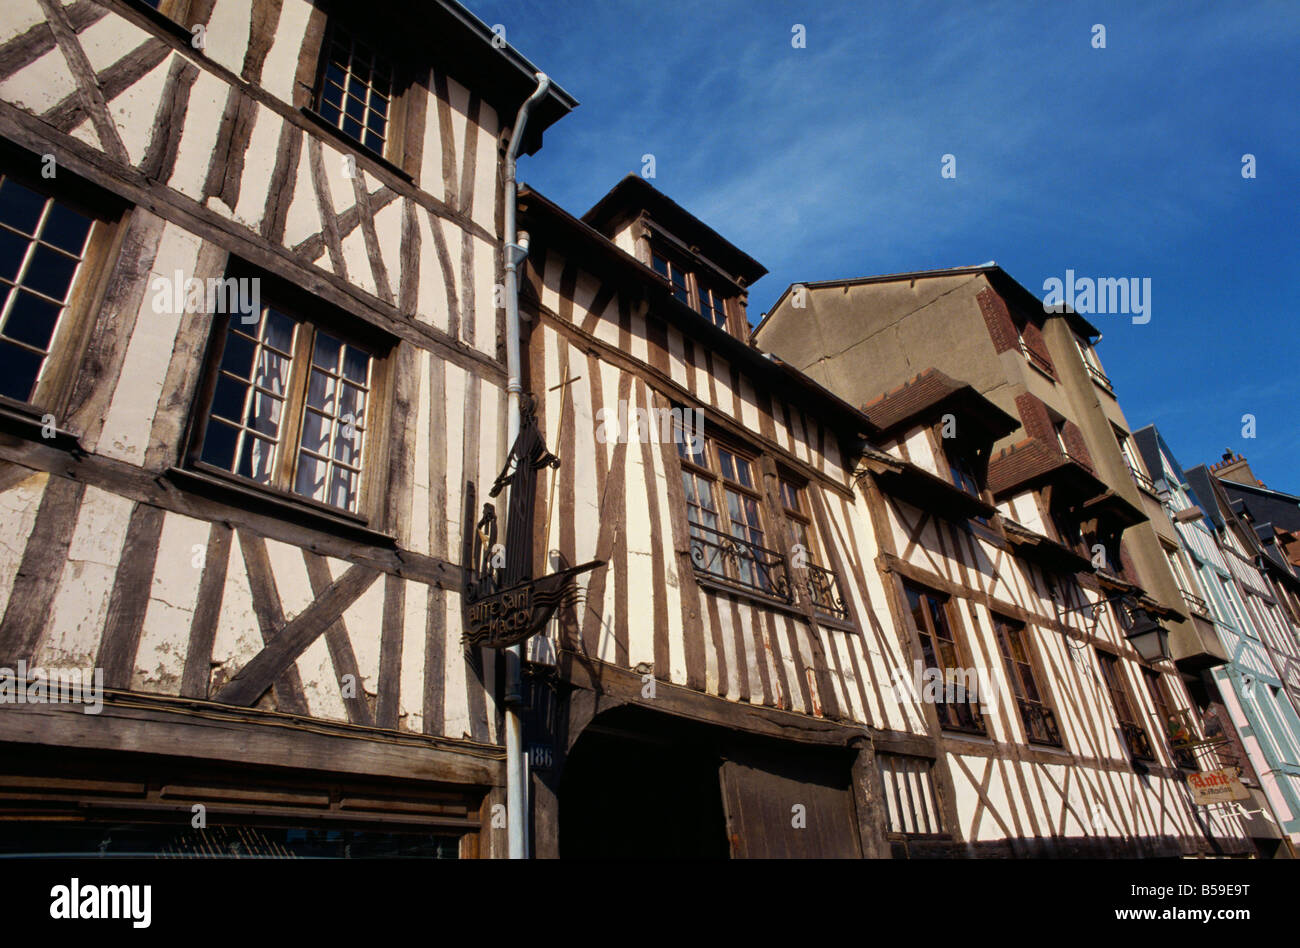 Aitre Saint Maclou, 16th century charnel house, typical of half timbered houses in the city of Rouen, Haute Normandie, France Stock Photo